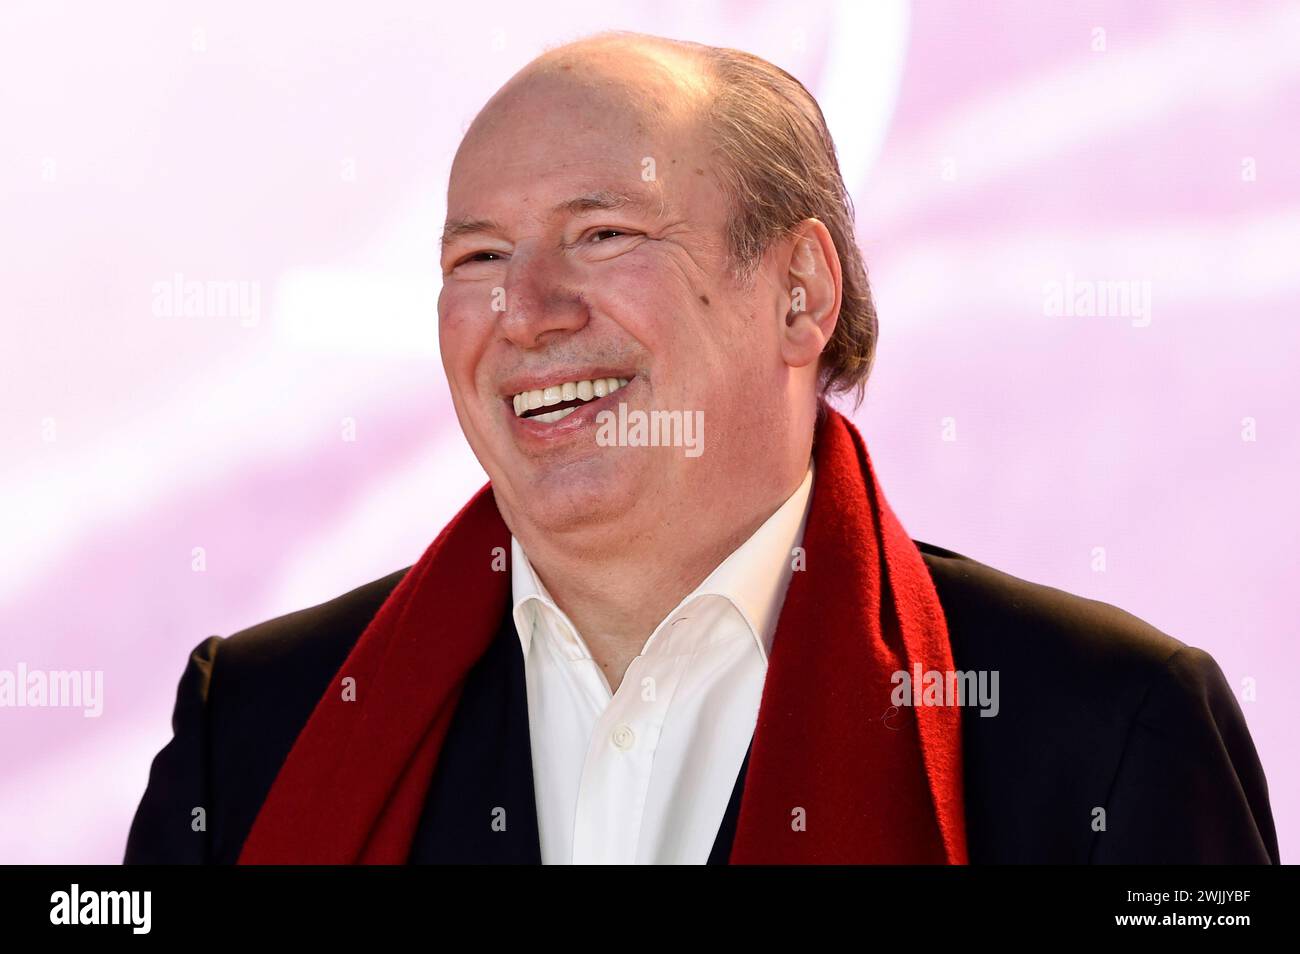 Hans Zimmer bei der Weltpremiere des Kinofilms Dune: Part Two / Dune: Teil 2 im Odeon Leicester Square. London, 15.02.2024 *** Hans Zimmer at the world premiere of the feature film Dune Part Two Dune Part 2 at the Odeon Leicester Square London, 15 02 2024 Foto:xS.xVasx/xFuturexImagex dune 4206 Stock Photo